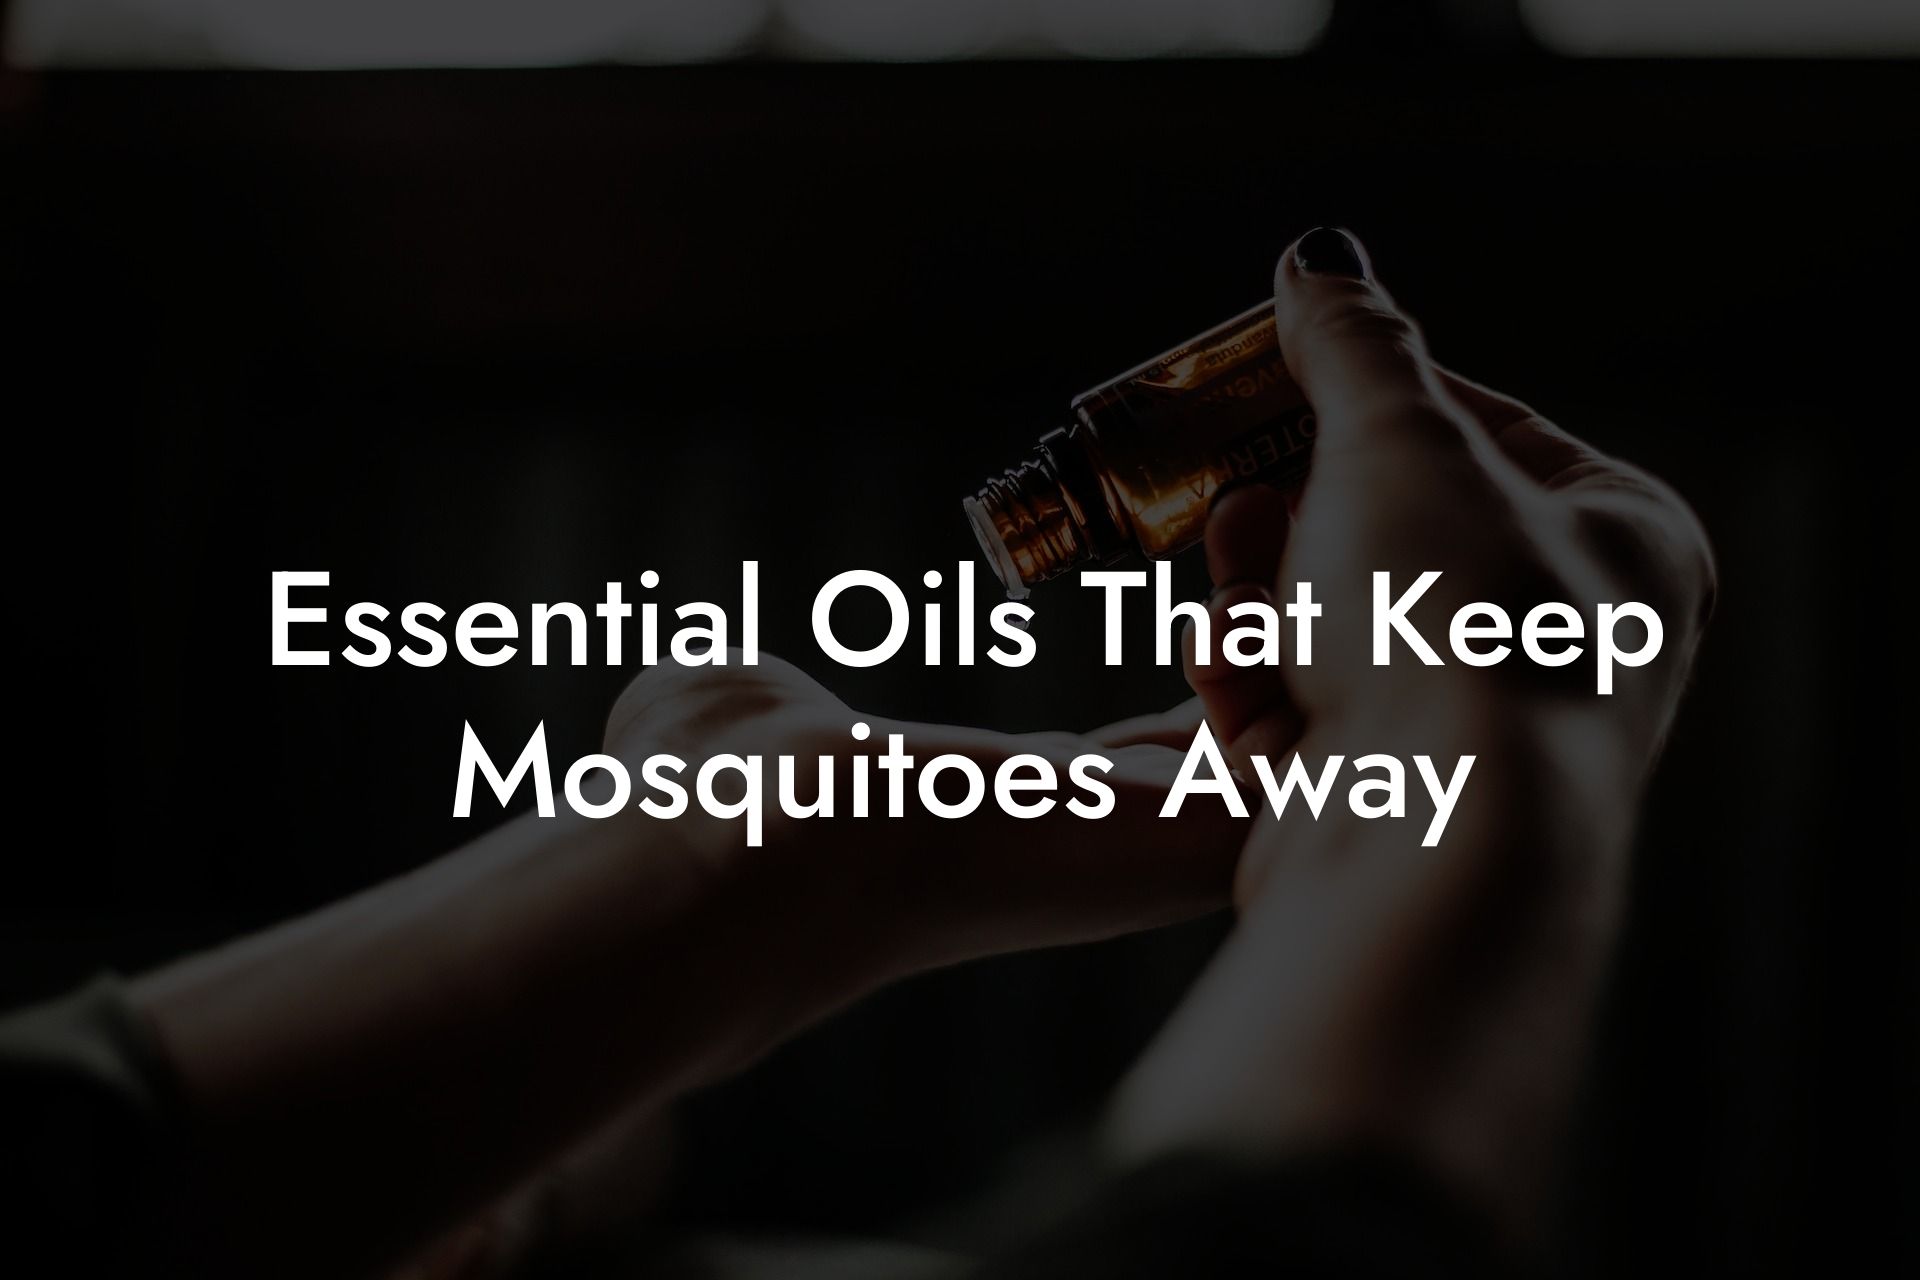 Essential Oils That Keep Mosquitoes Away